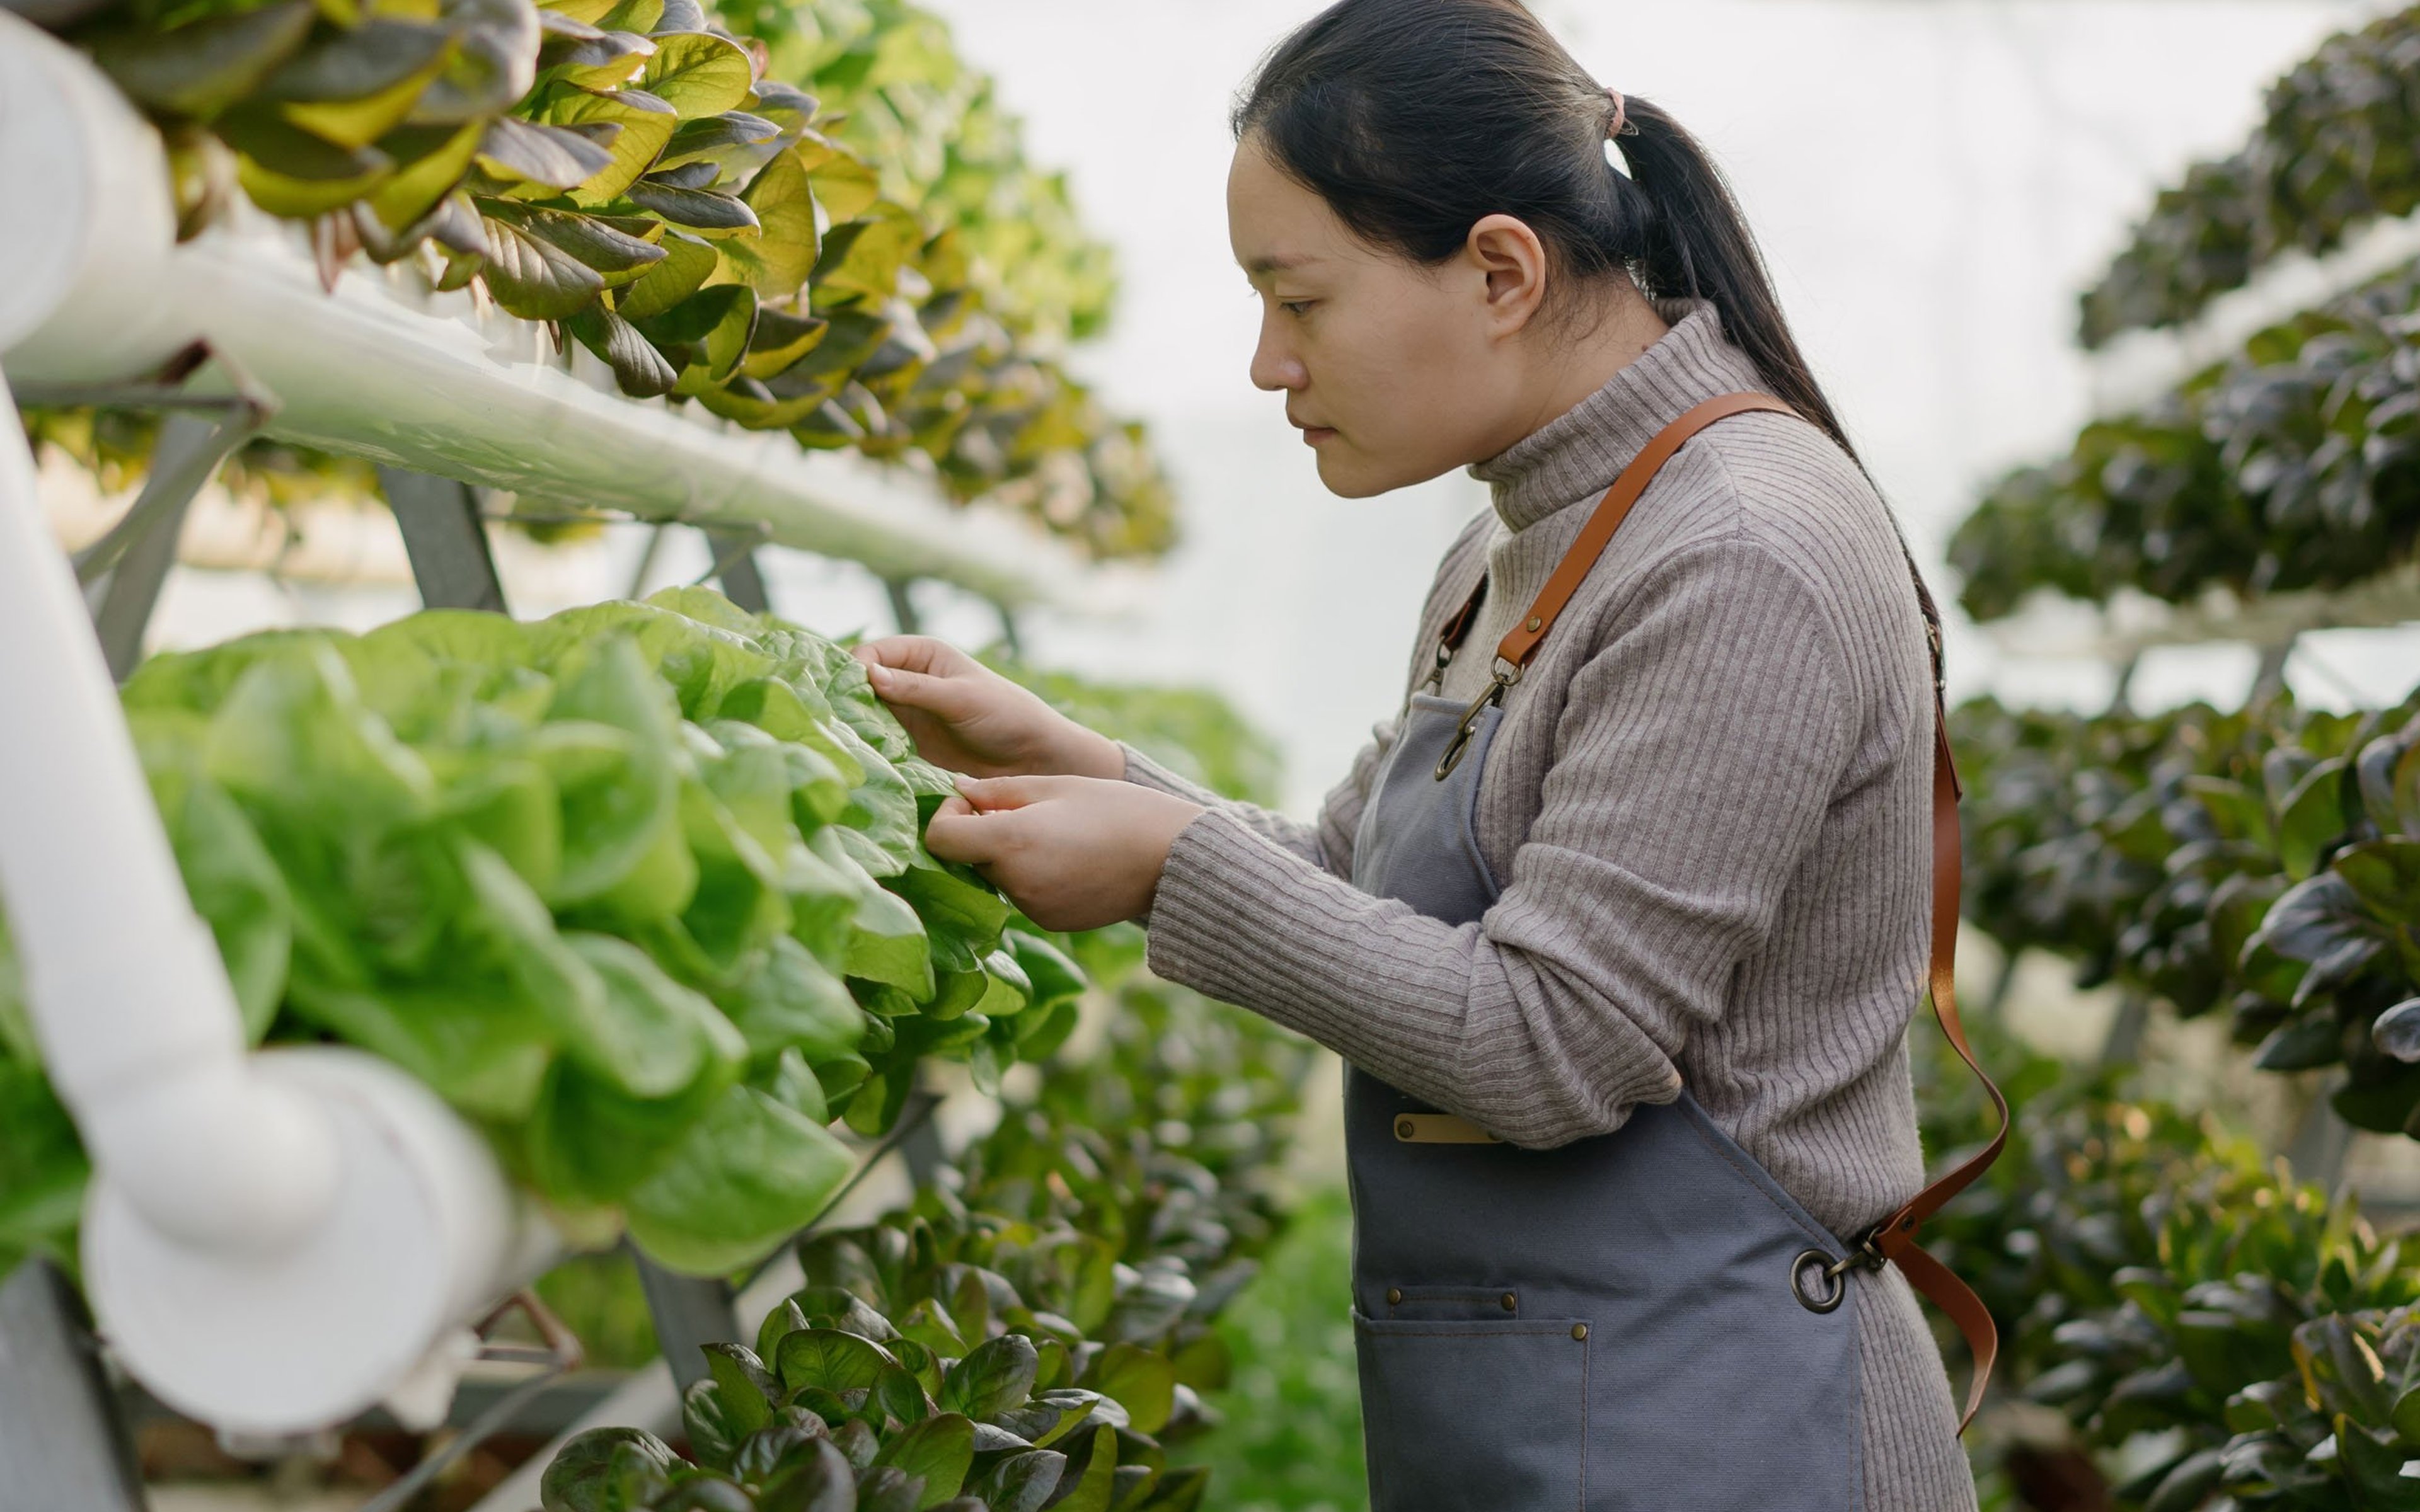 Asian woman working in vegetable greenhouse.